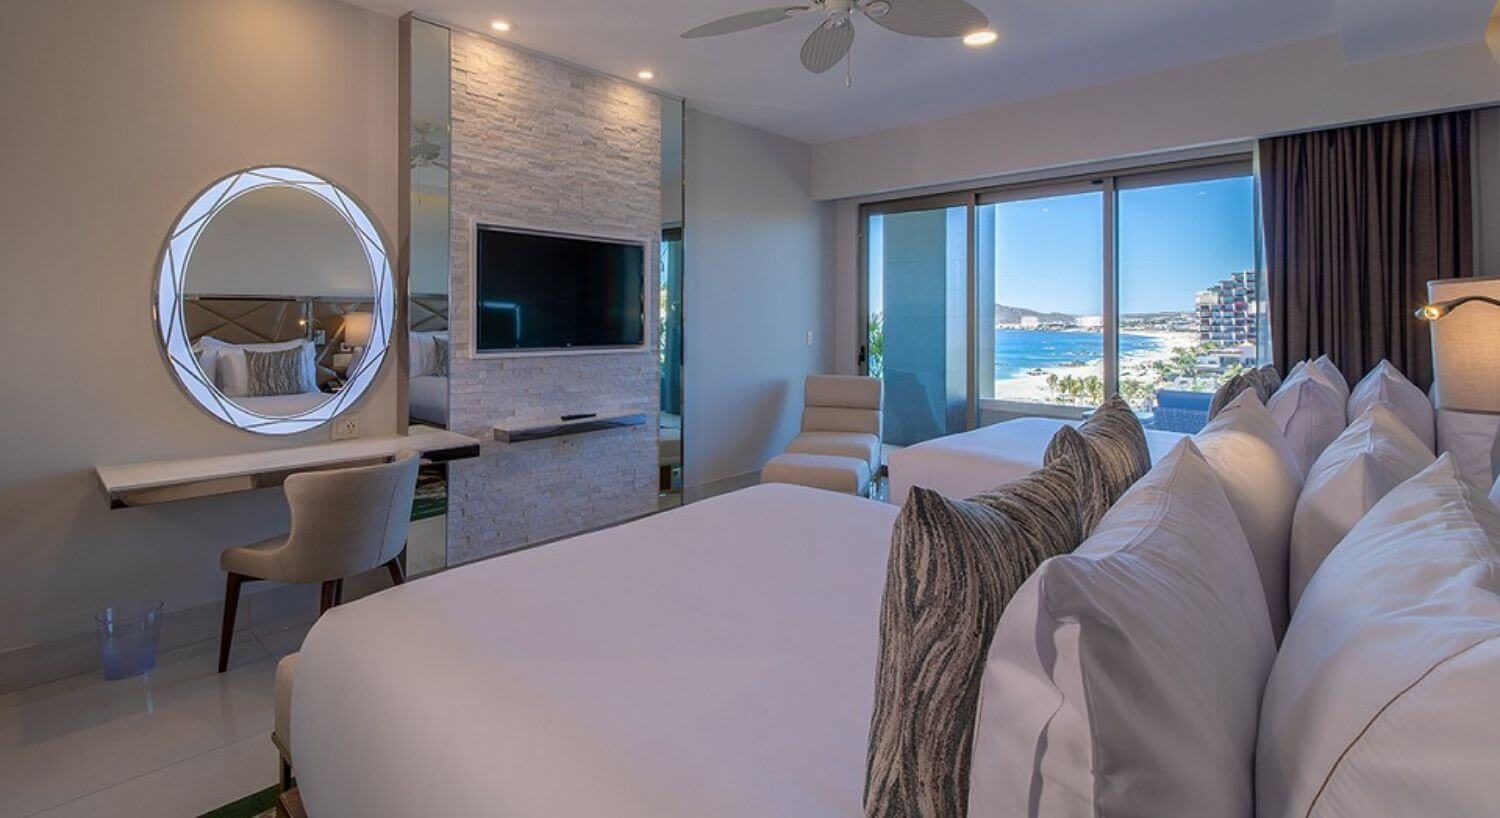 A bedroom with 2 queen beds, a flat screen TV and writing desk and chair on the opposite wall, a chaise lounge chair in the corner, and sliding doors out to a private balcony with patio furniture, and the beach and ocean views.